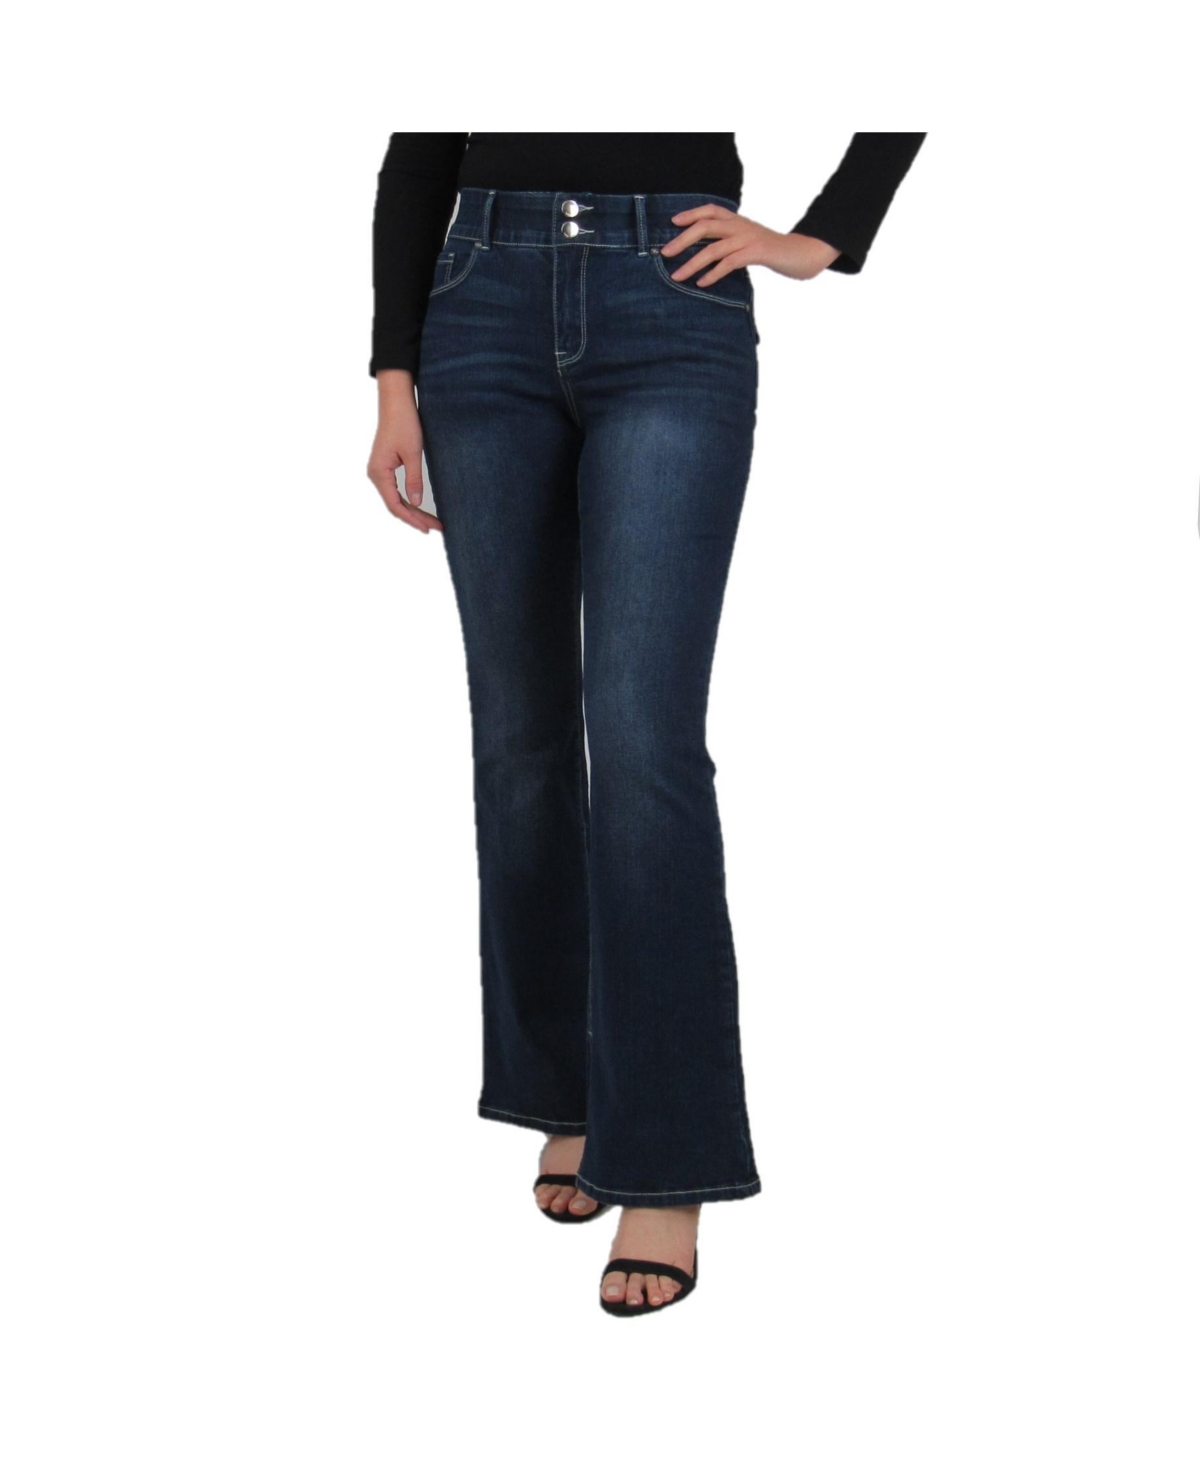 Maternity Tummy Control Double Button 5-Pocket Bootcut With Flap Back Pocket Detail - Dark wash